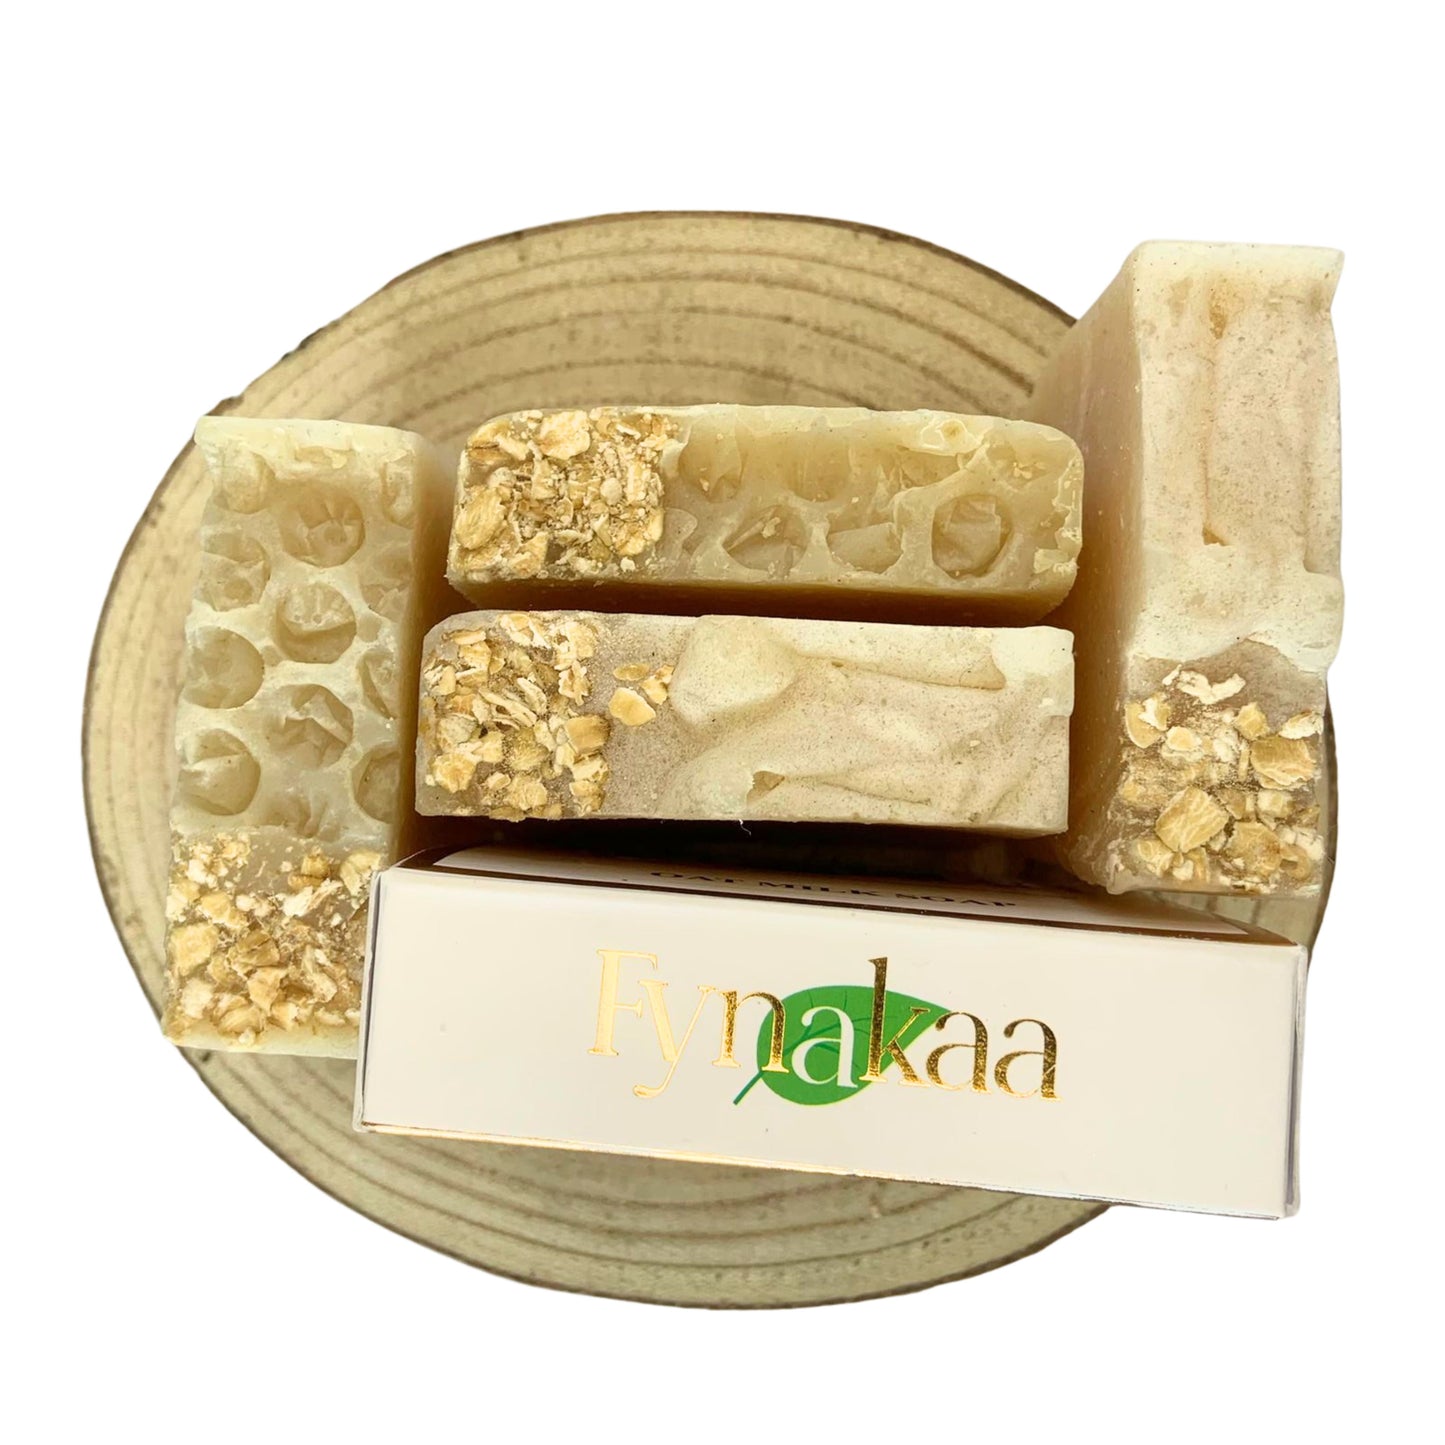 Oatmilk Cold Processed Handmade Natural Organic Premium Soap for glowing skin and dry skin